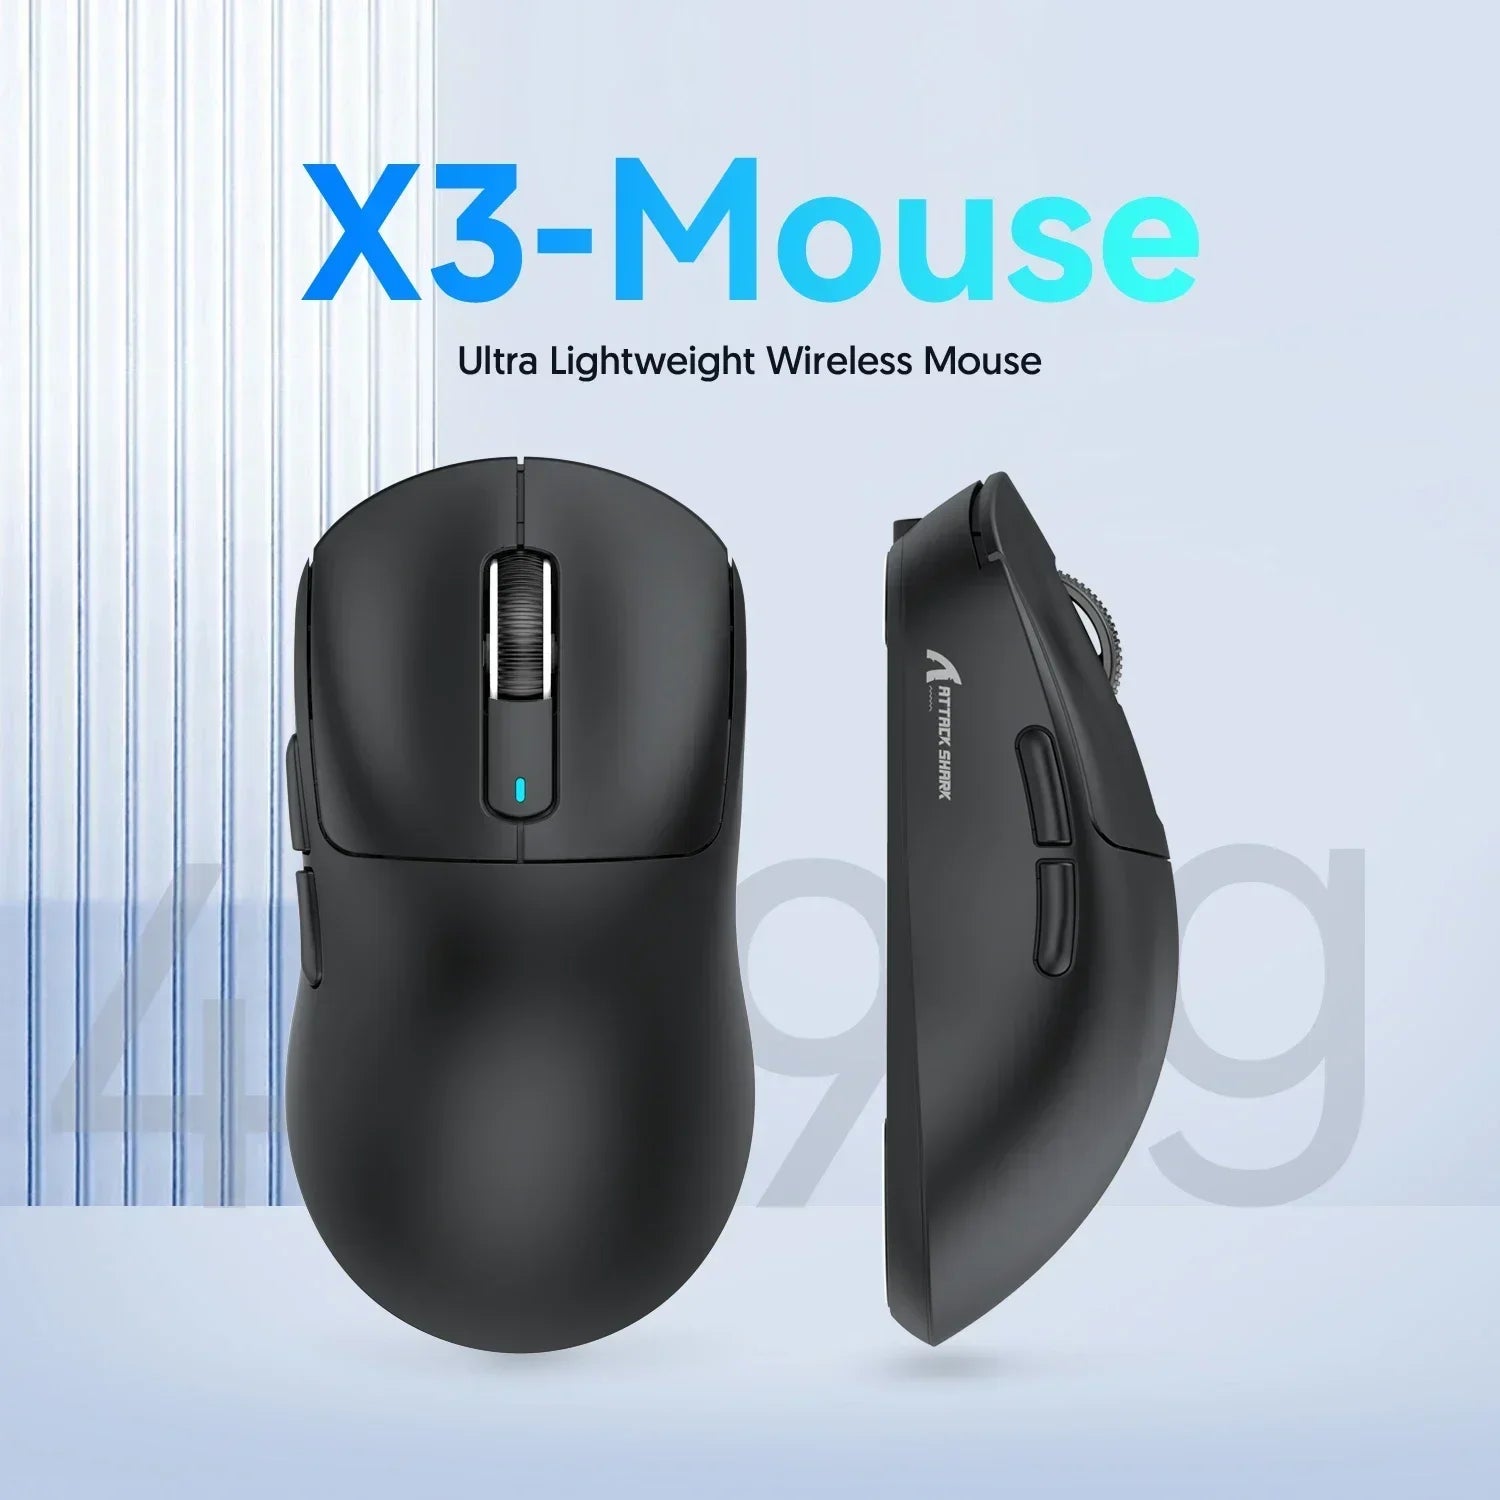 Lightweight Bluetooth Gaming Mouse Tri-Mode 49g